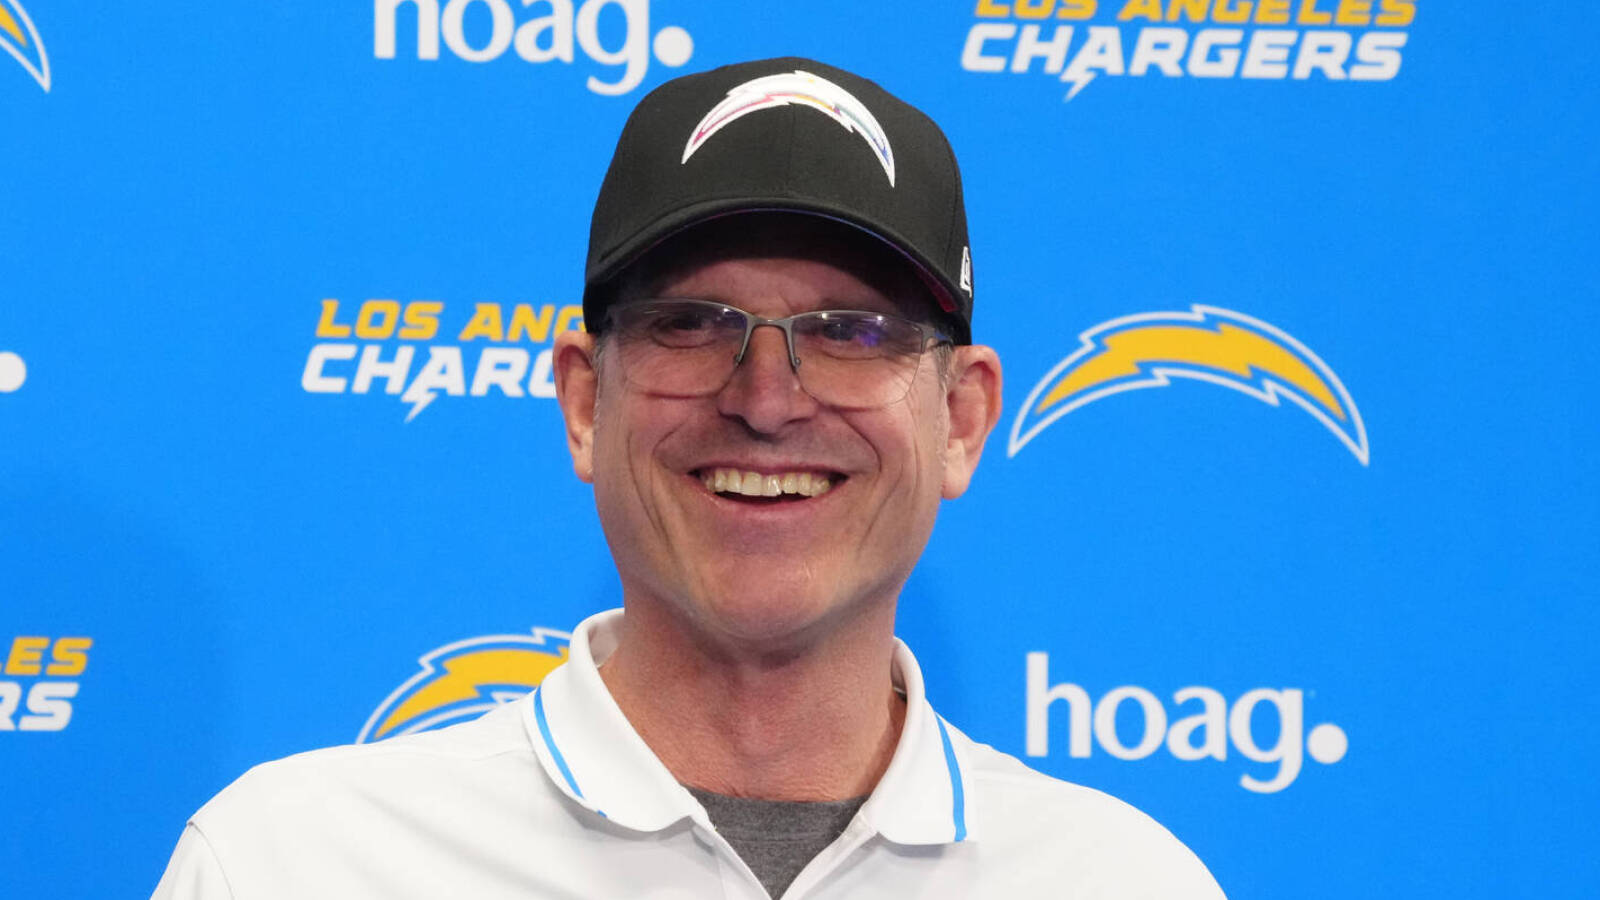 Former Pro Bowl safety has wild prediction for Jim Harbaughs first season with Chargers